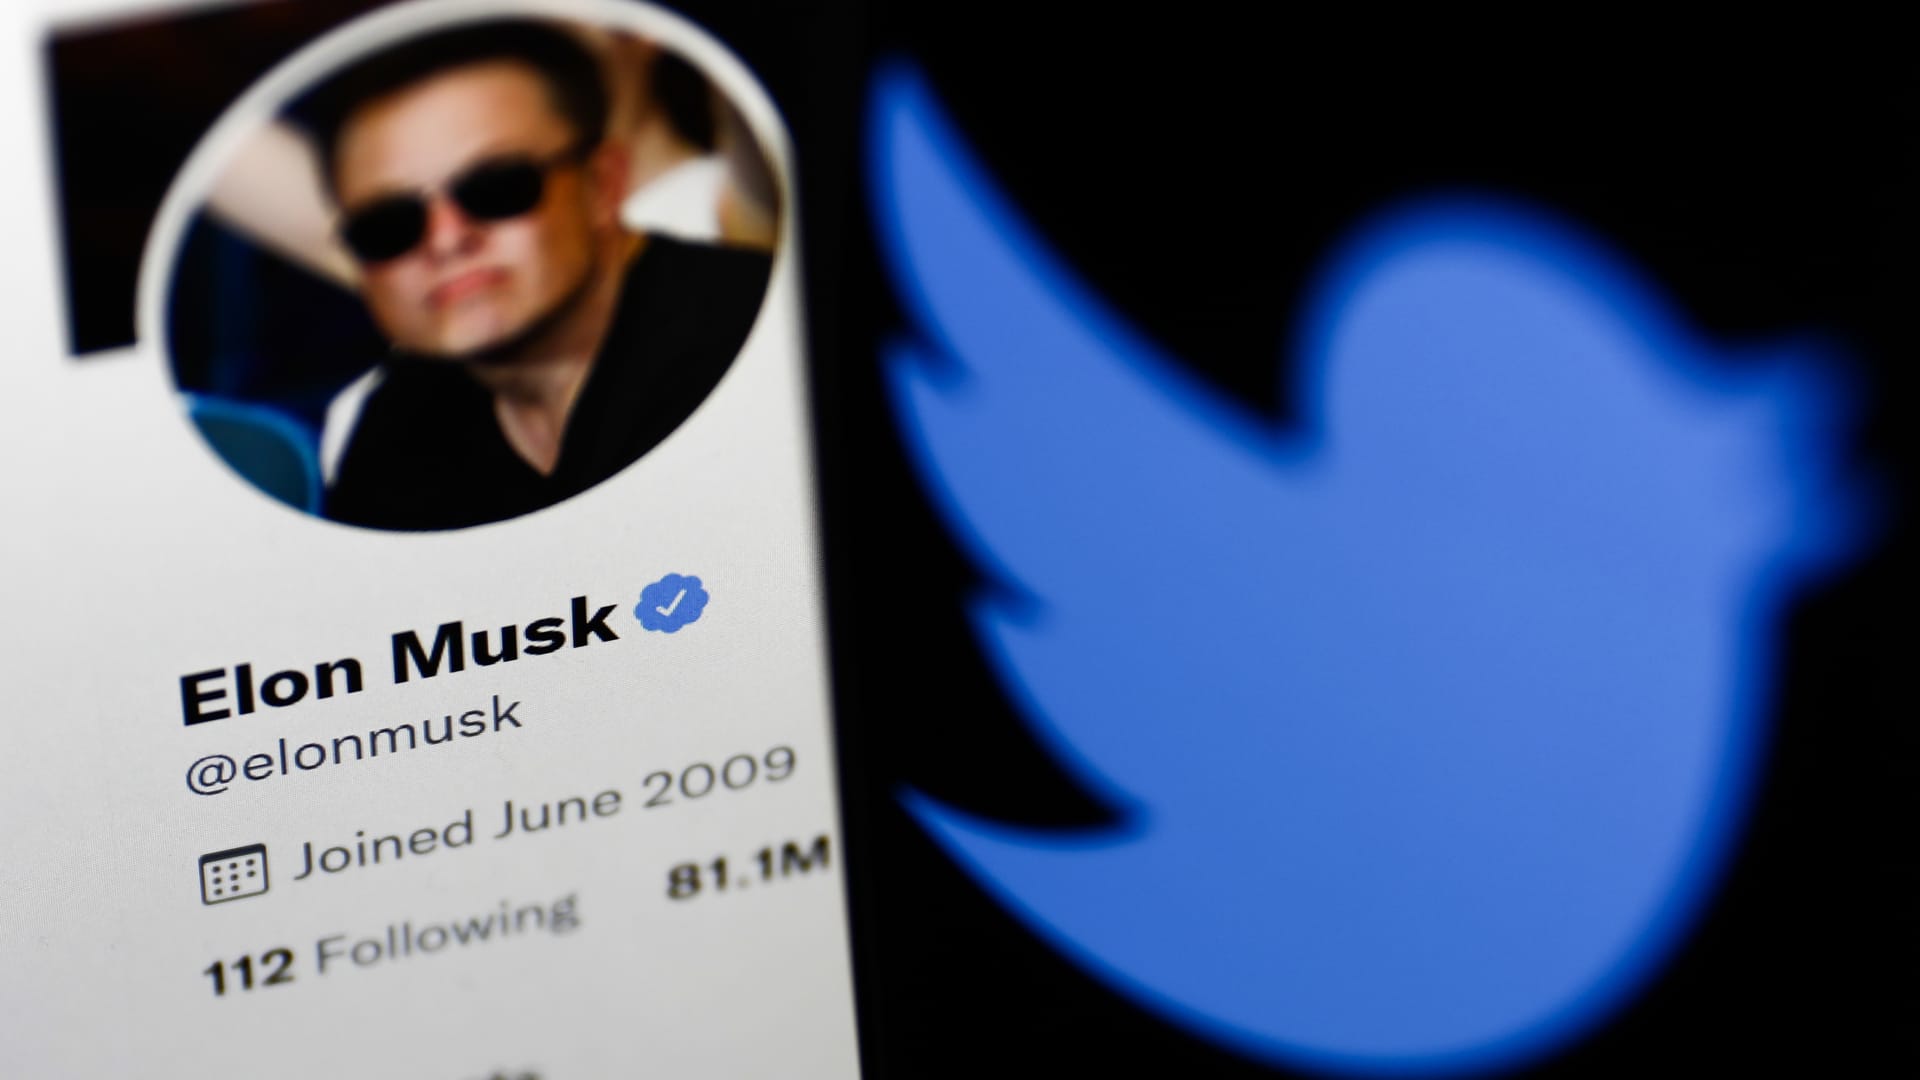 Twitter board adopts poison pill after Musk's $43 billion bid to buy company